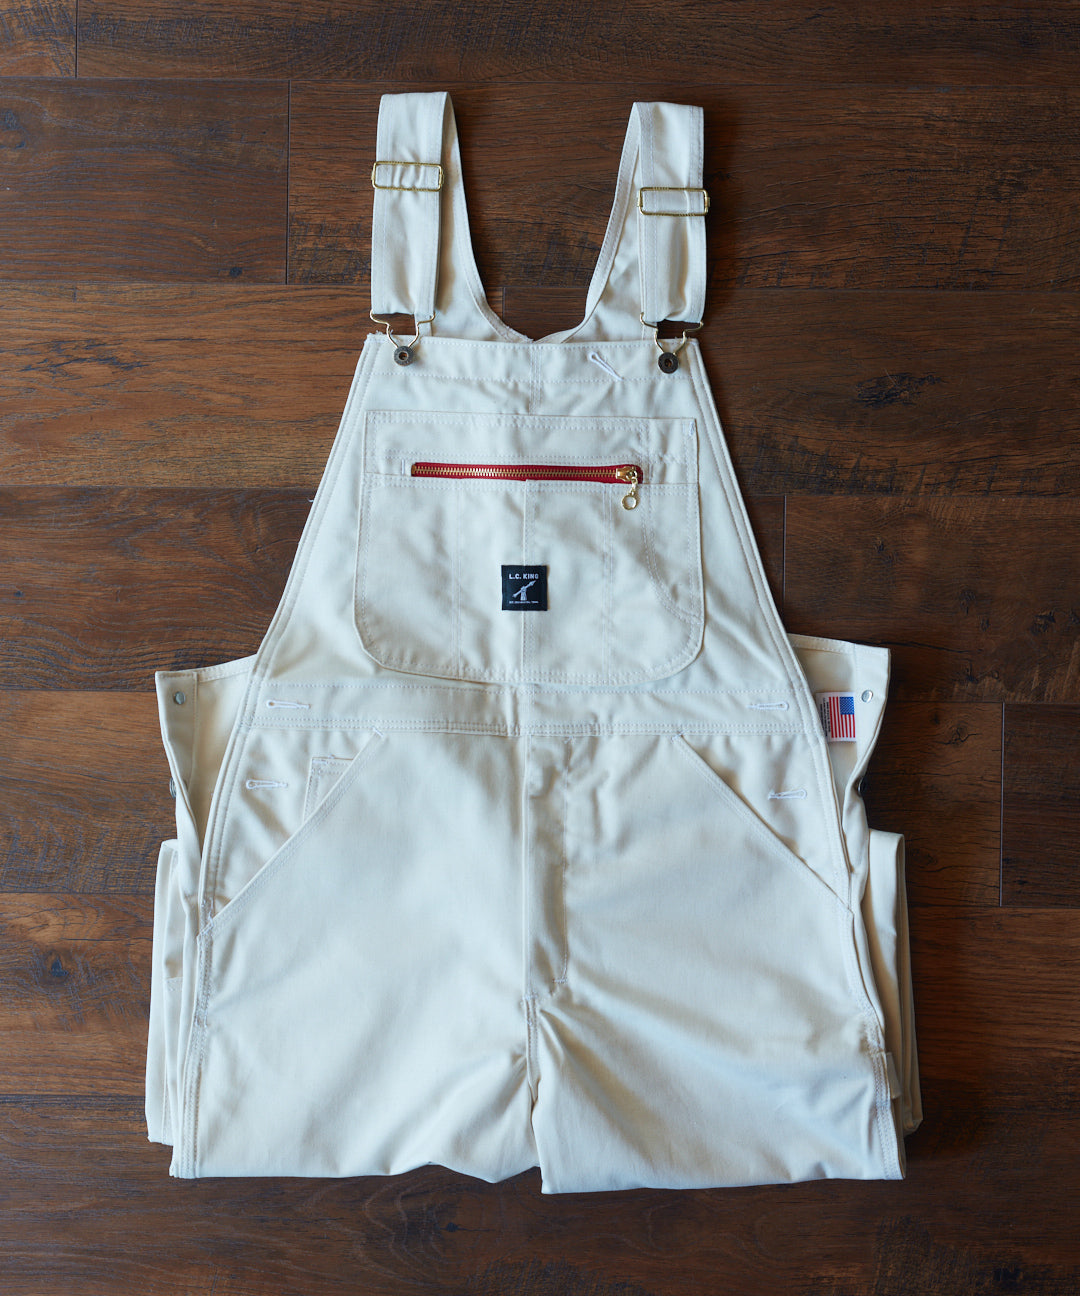 LC King White Drill Overalls - High Back – LC King Mfg